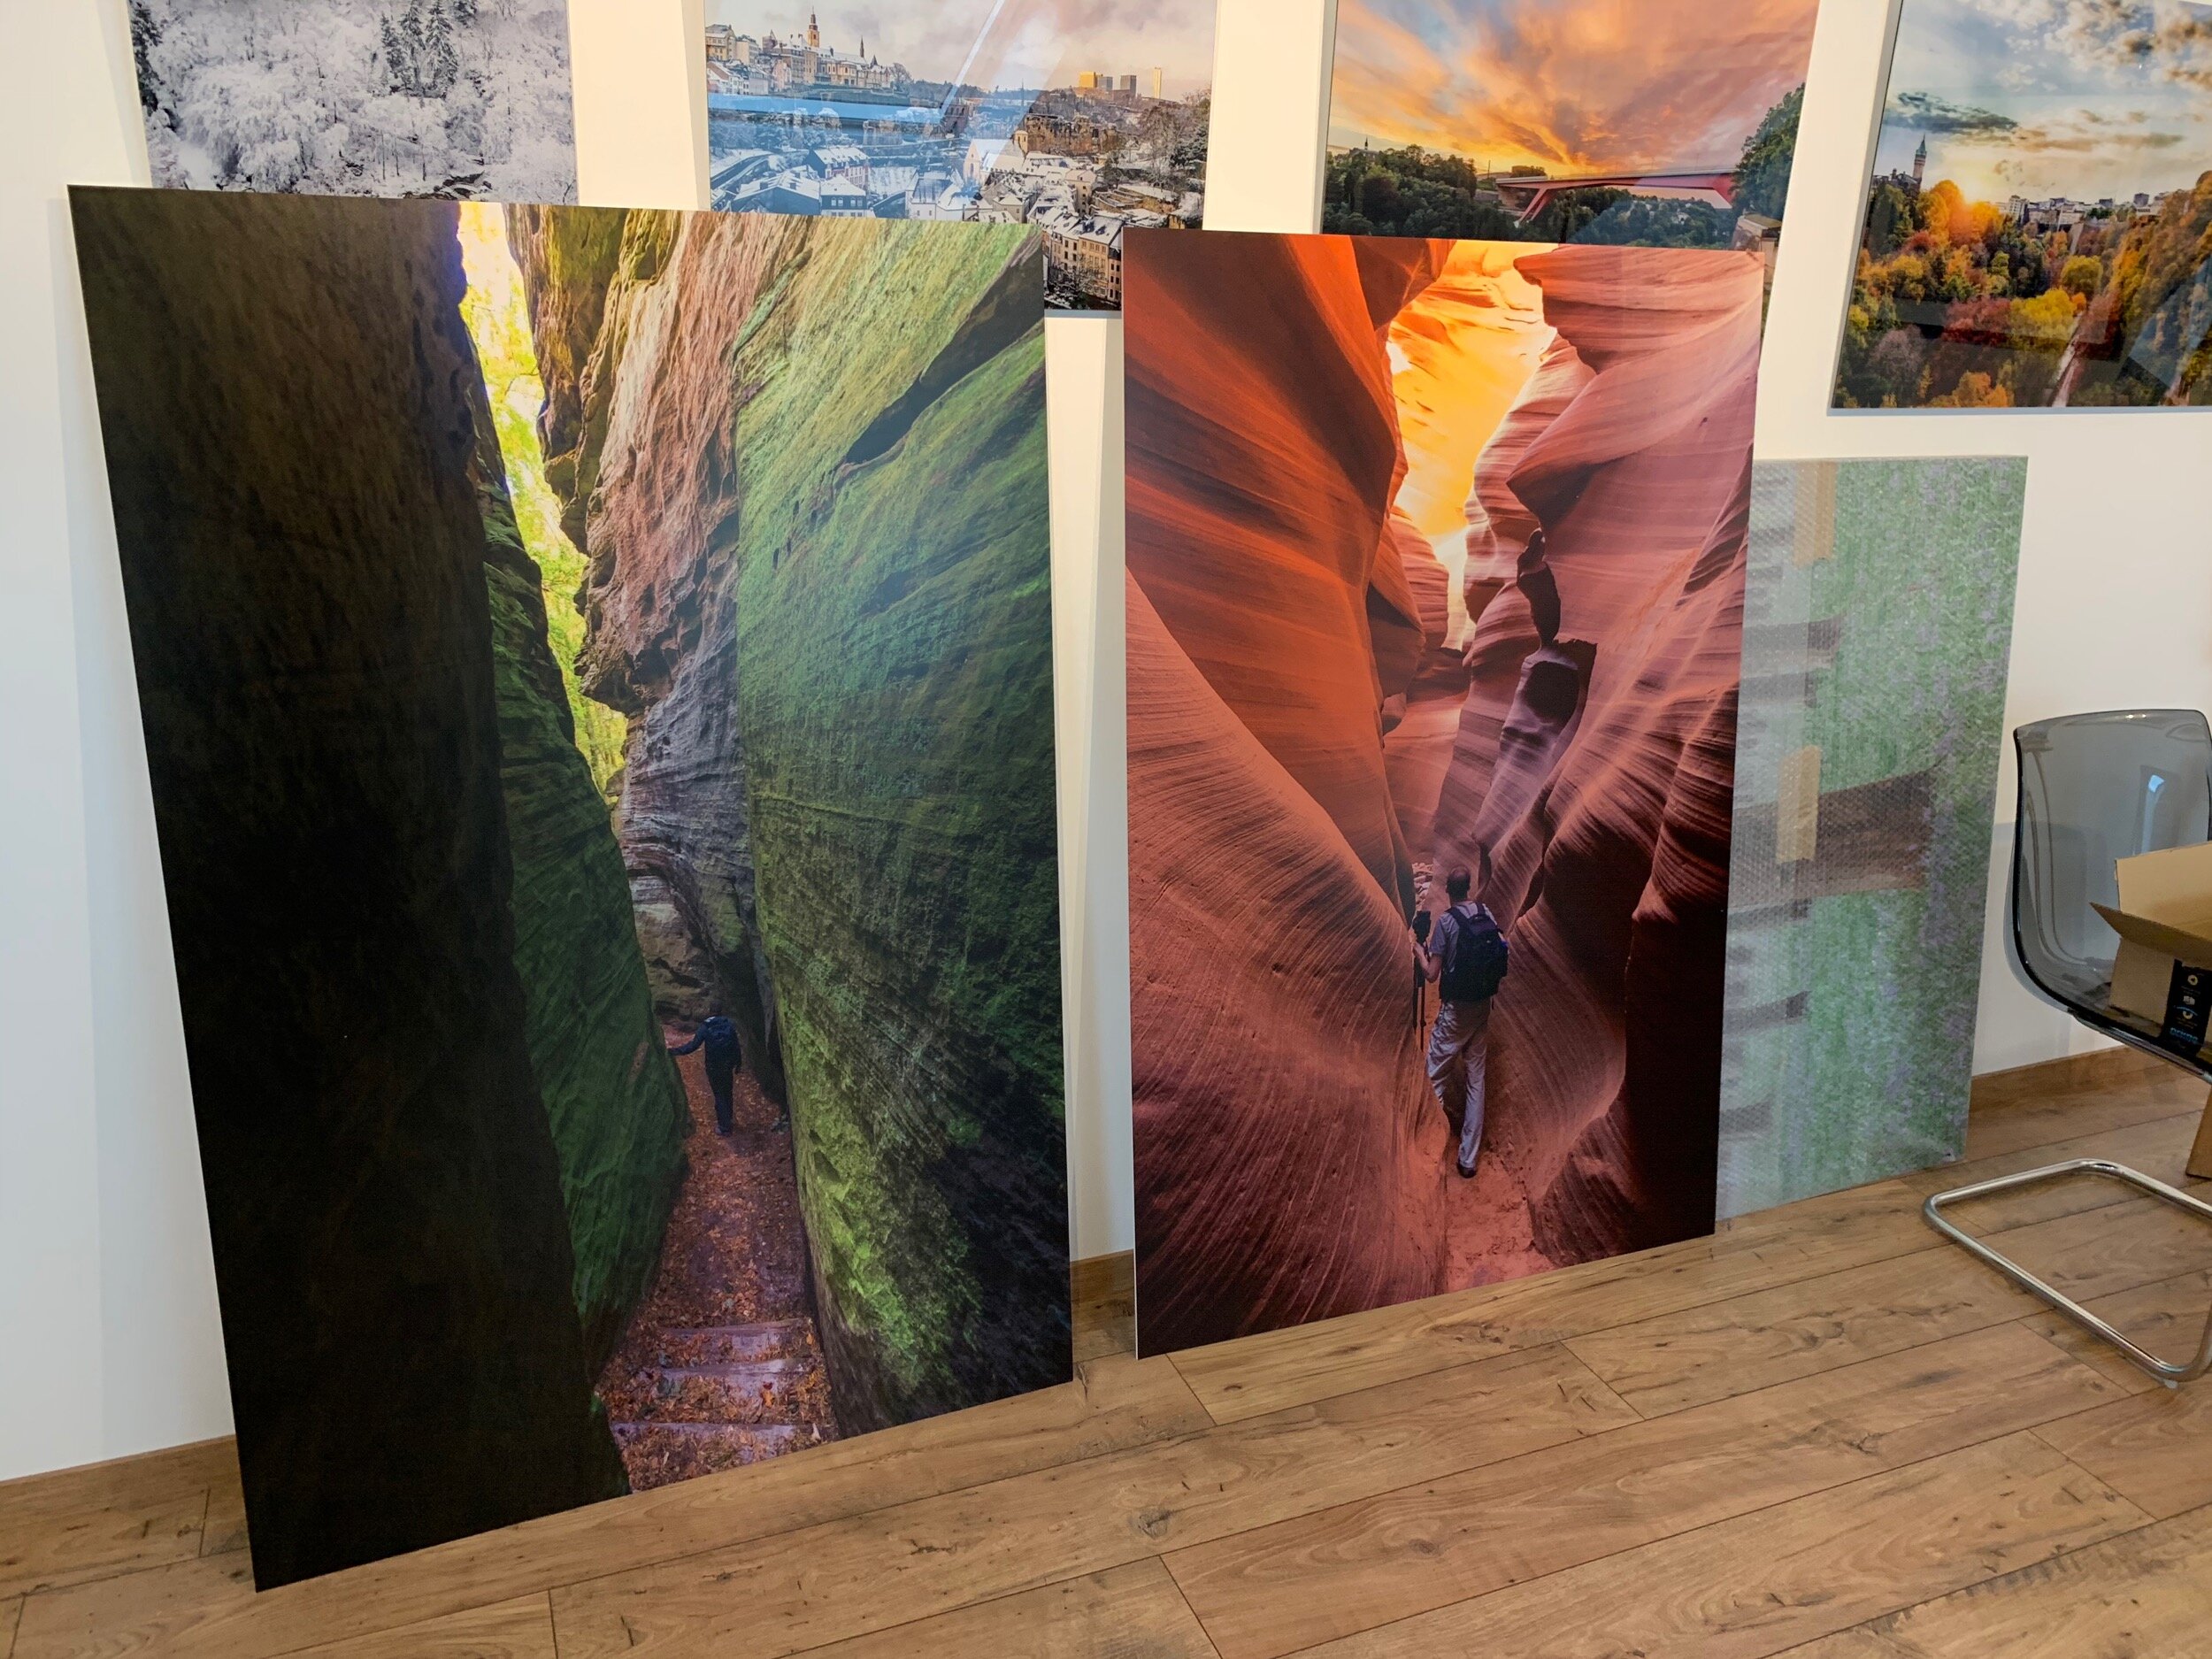 How to create a photography exhibition - Home and Away - Landscapes by Christophe Van Biesen - Art exhibition at the Contemporary Art Gallery Am Tunnel - Behind the scenes - Atelier